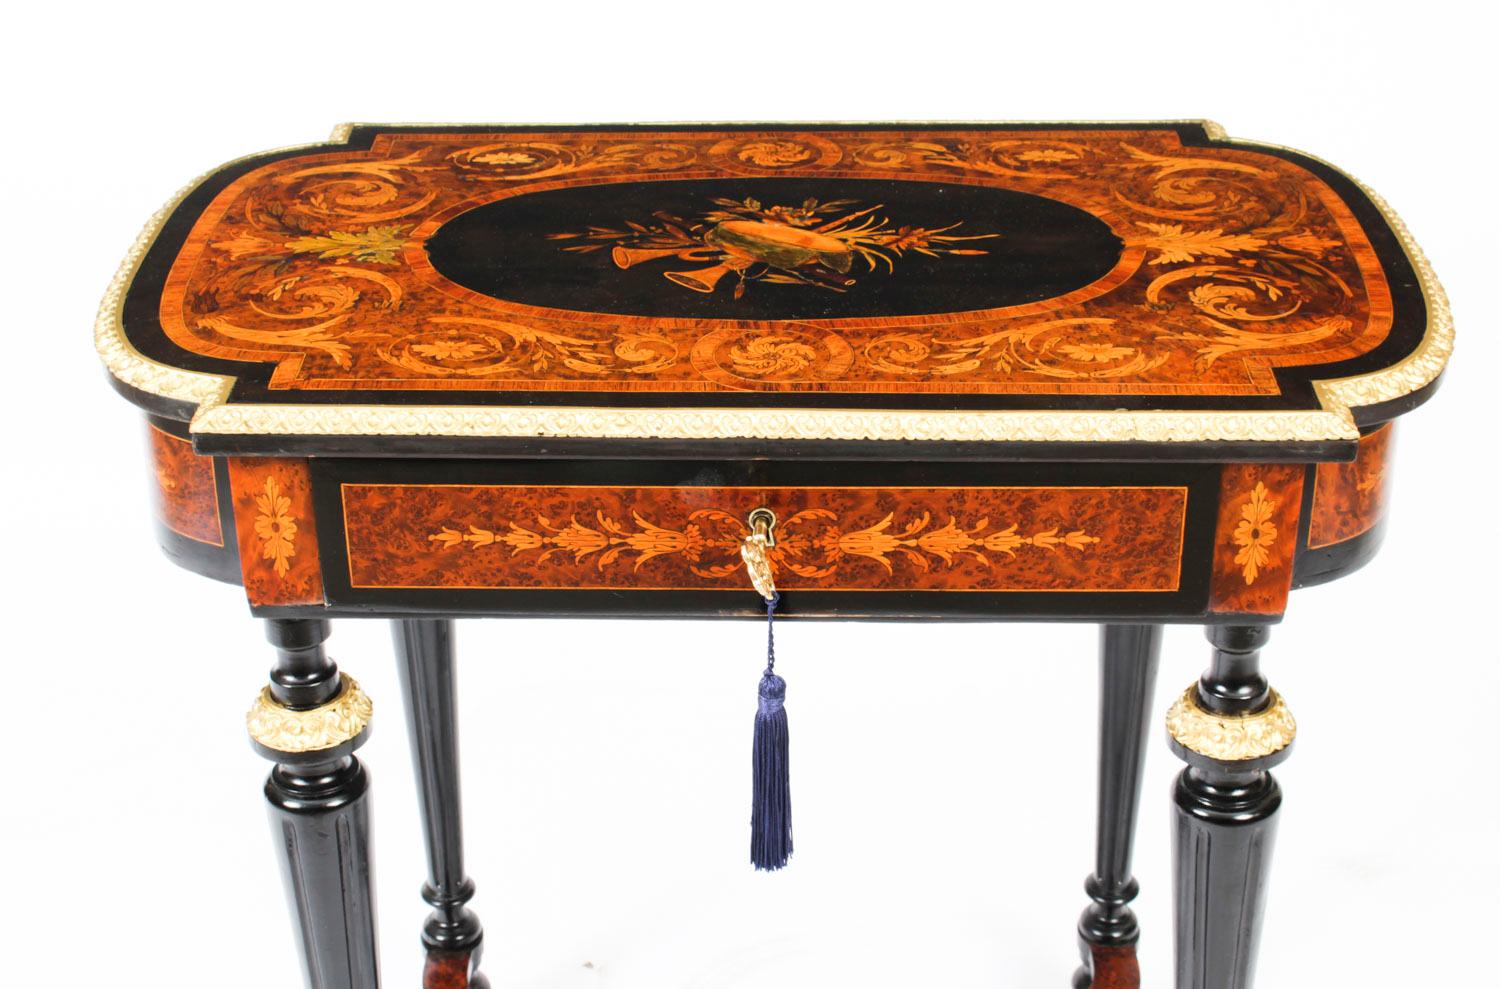 A superb burr walnut, marquetry and ebonised sewing table, Circa 1860 in date

The ornately floral marquetry inlaid lid with ormolu border enclosing a fitted interior with drawers and compartments and raised on tapering reeded legs joined by an H